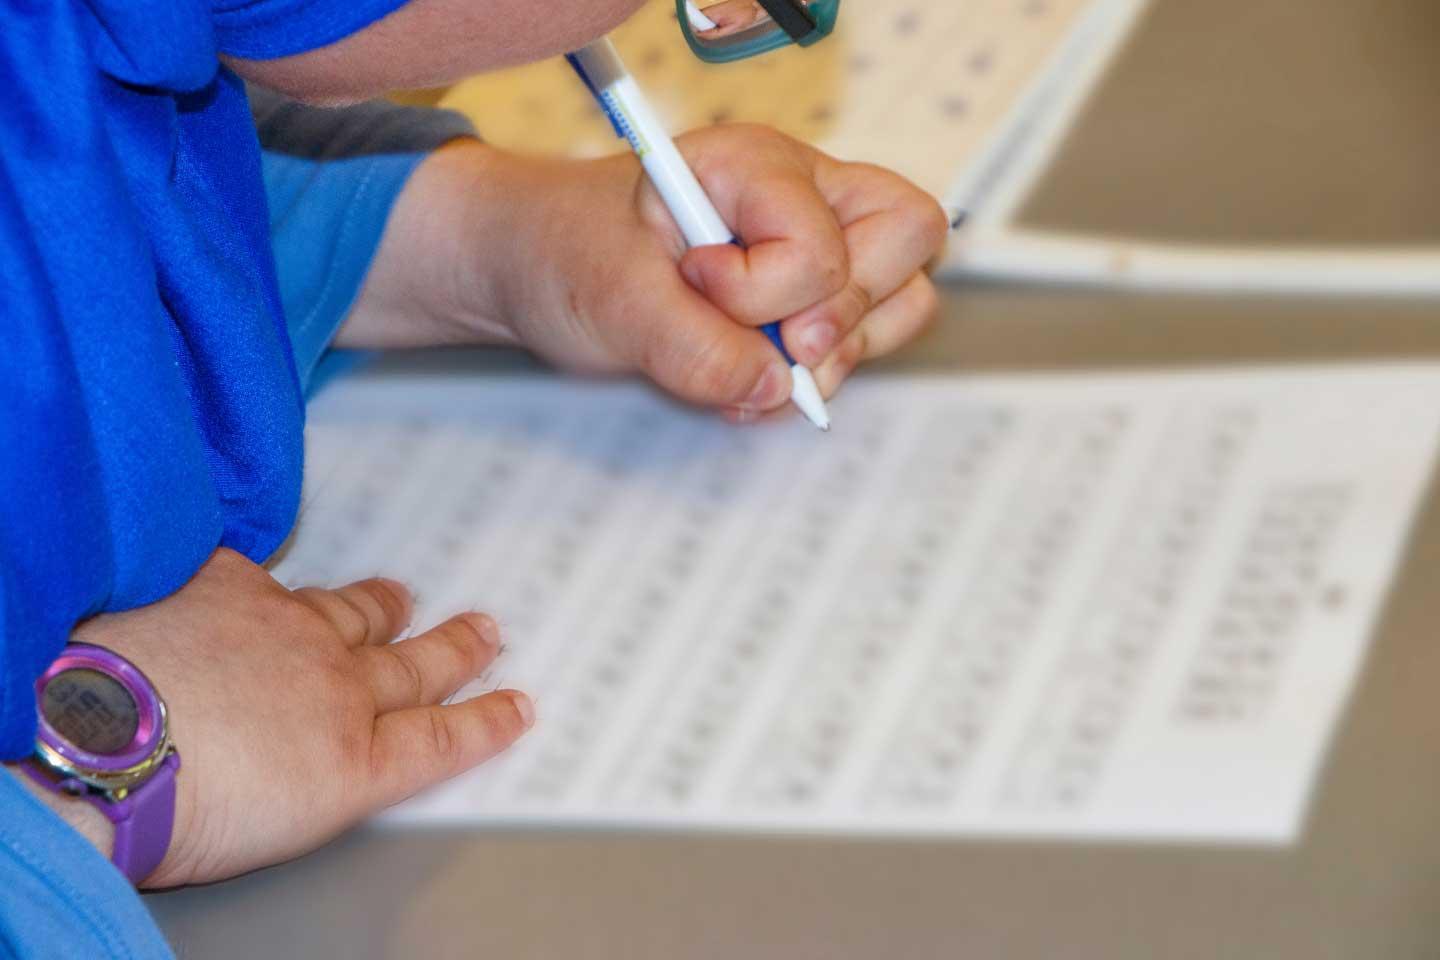 Individual filling out a form wearing a blue shirt and blue wrist watch